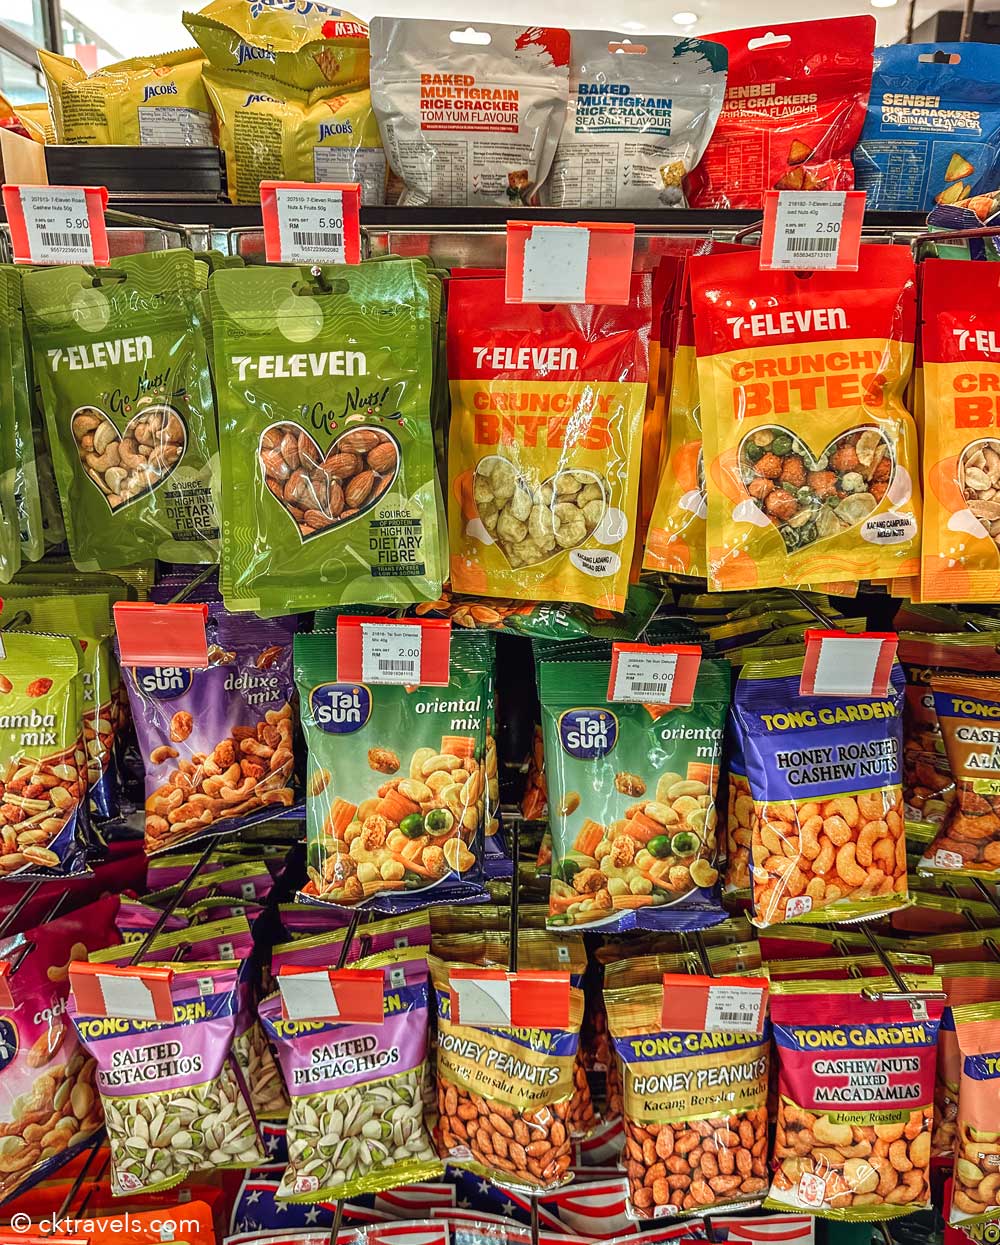 Malaysia 7-Eleven Stores - nuts